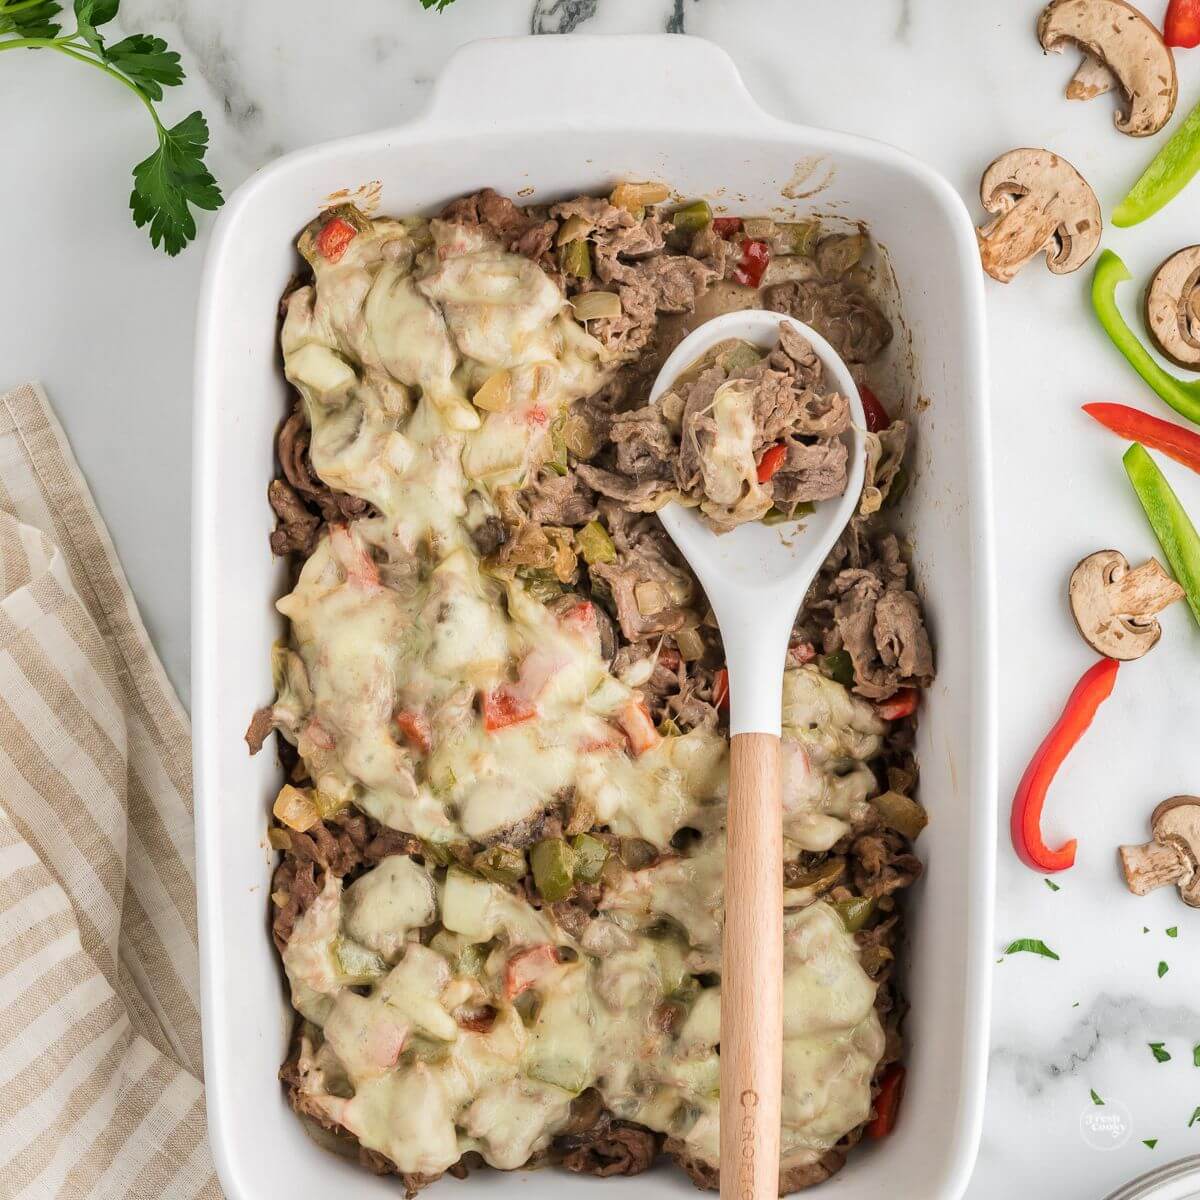 Philly cheesesteak casserole recipe with serving spoon in casserole dish.